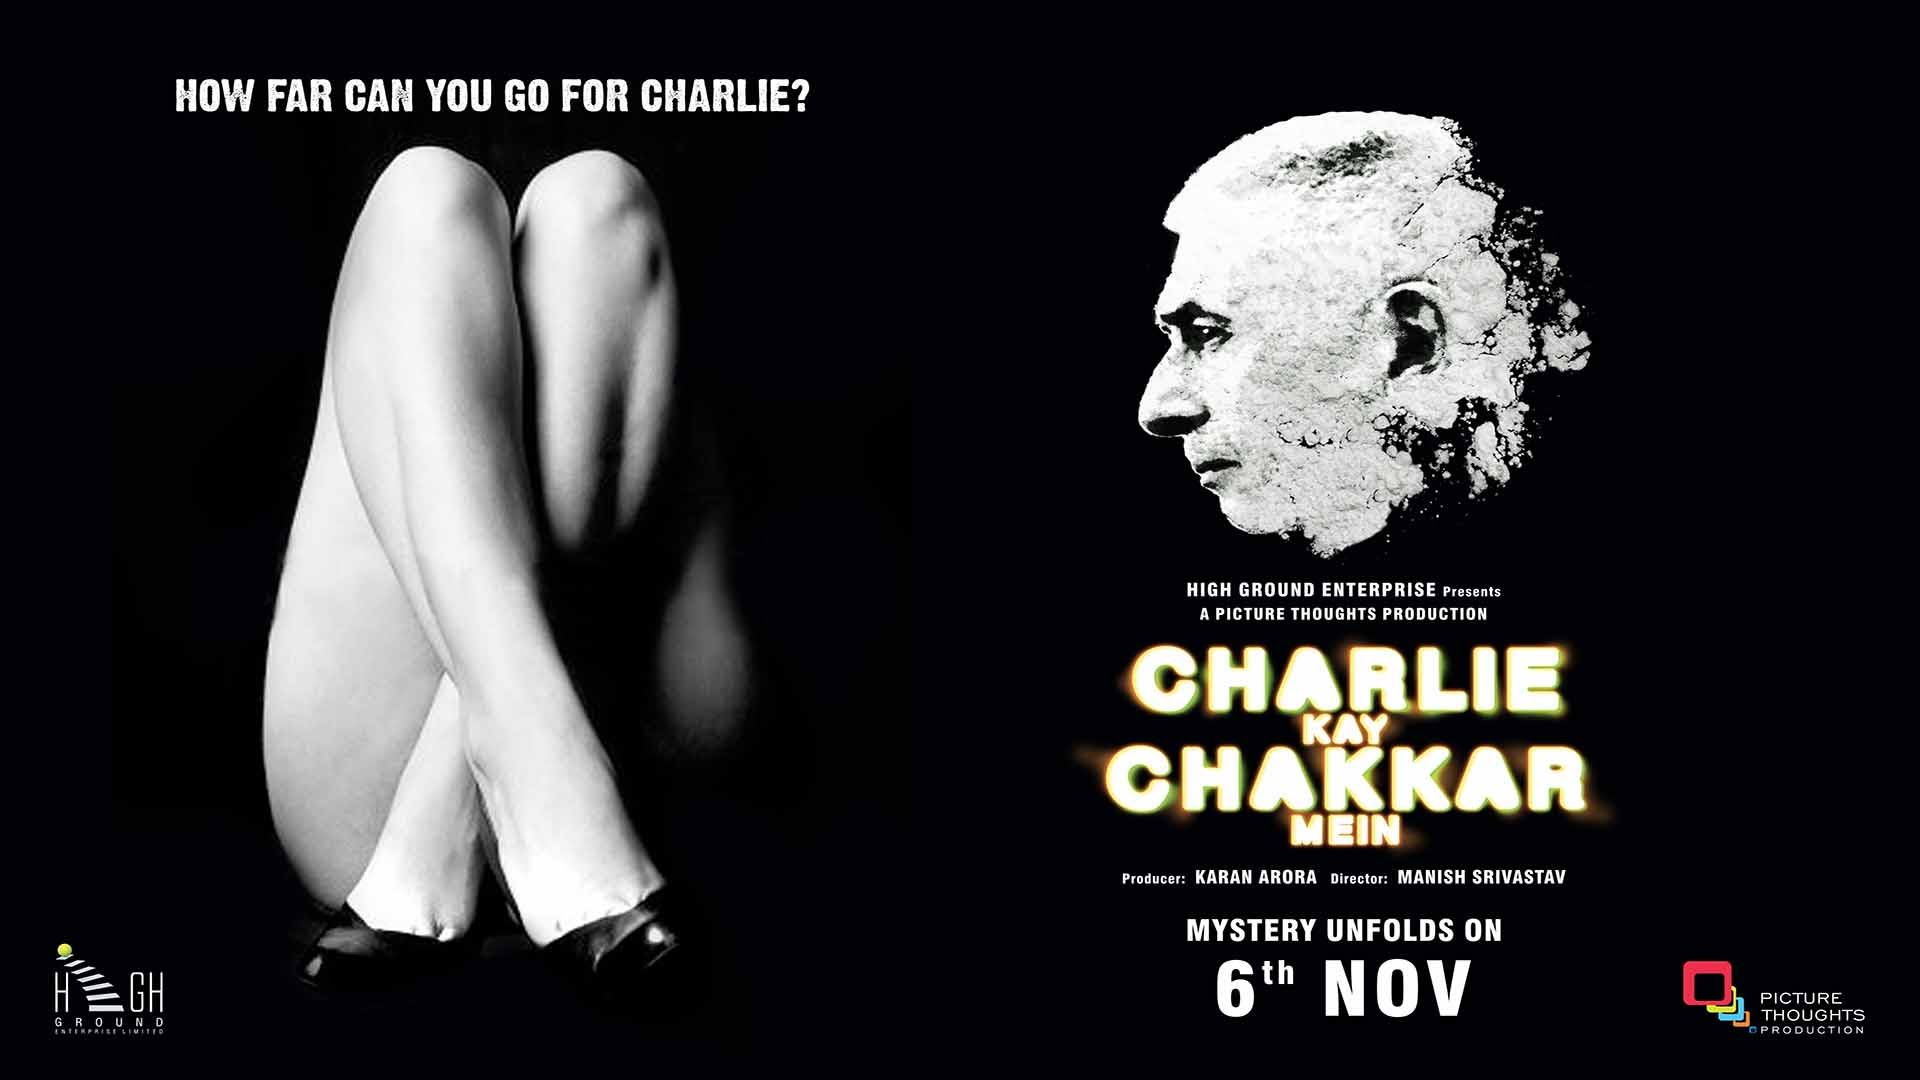 2nd Week Saturday Box Office Collection Of CHARLIE KAY CHAKKAR MEIN And YAARA SILLY SILLY